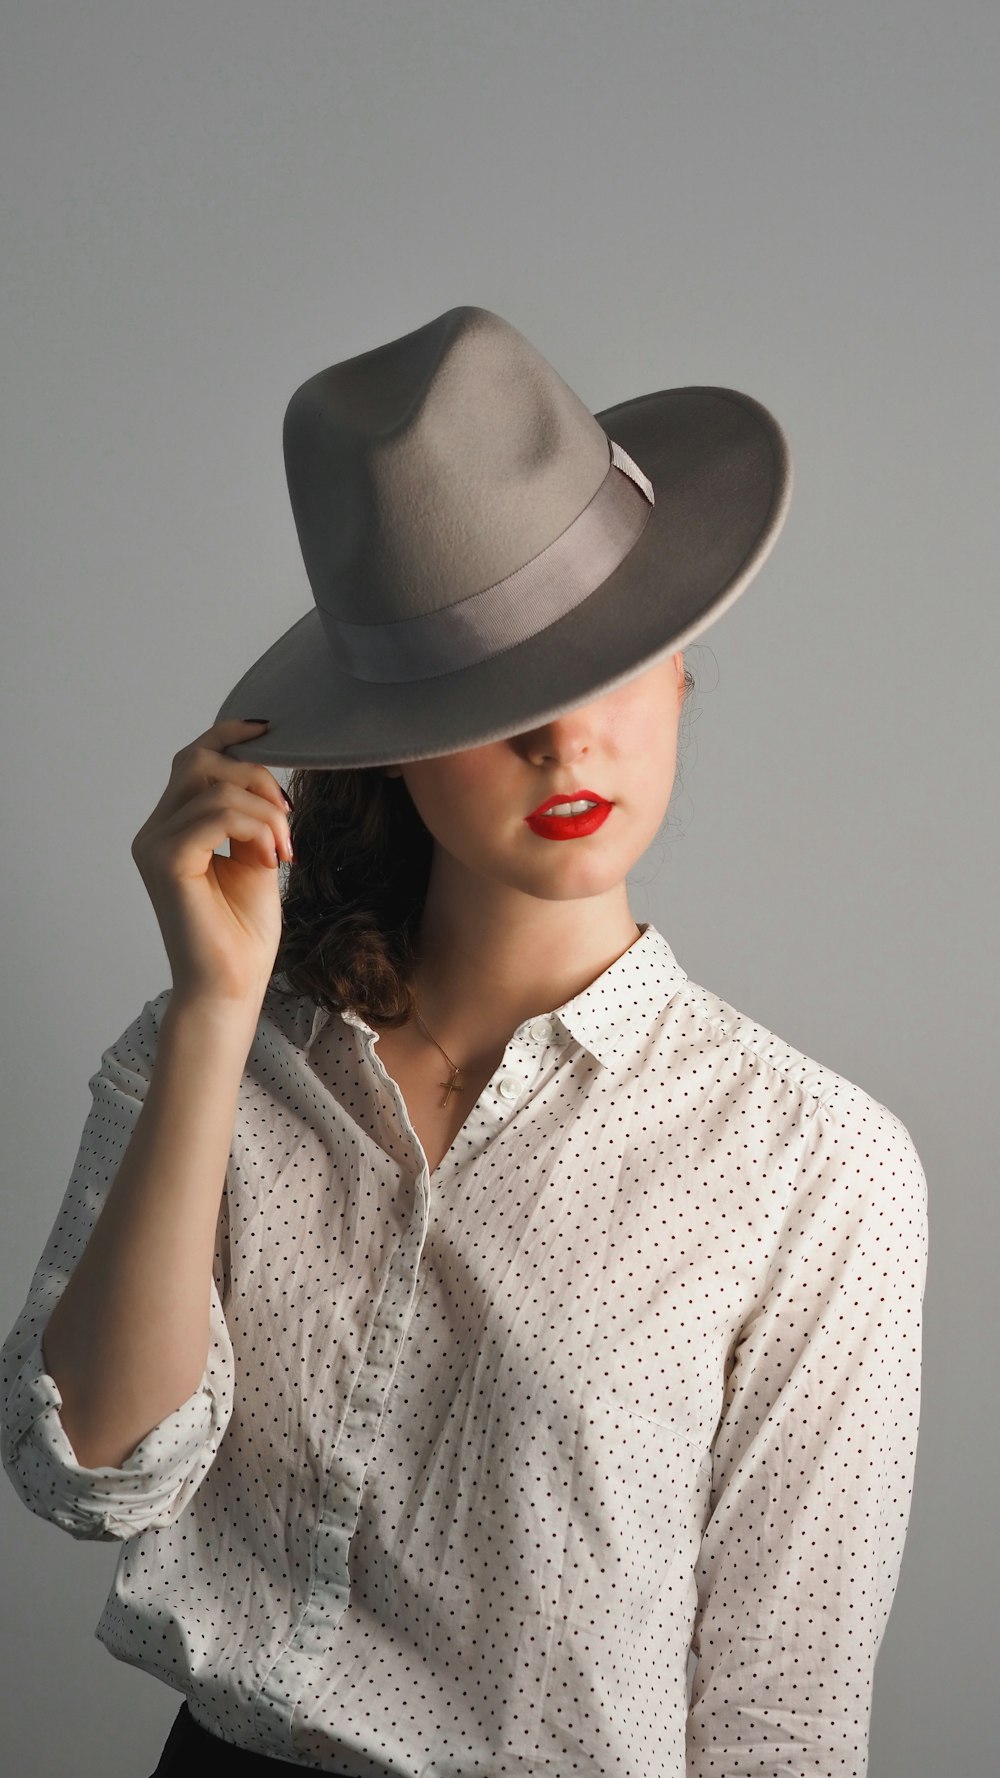 woman in grey button up shirt wearing grey hat